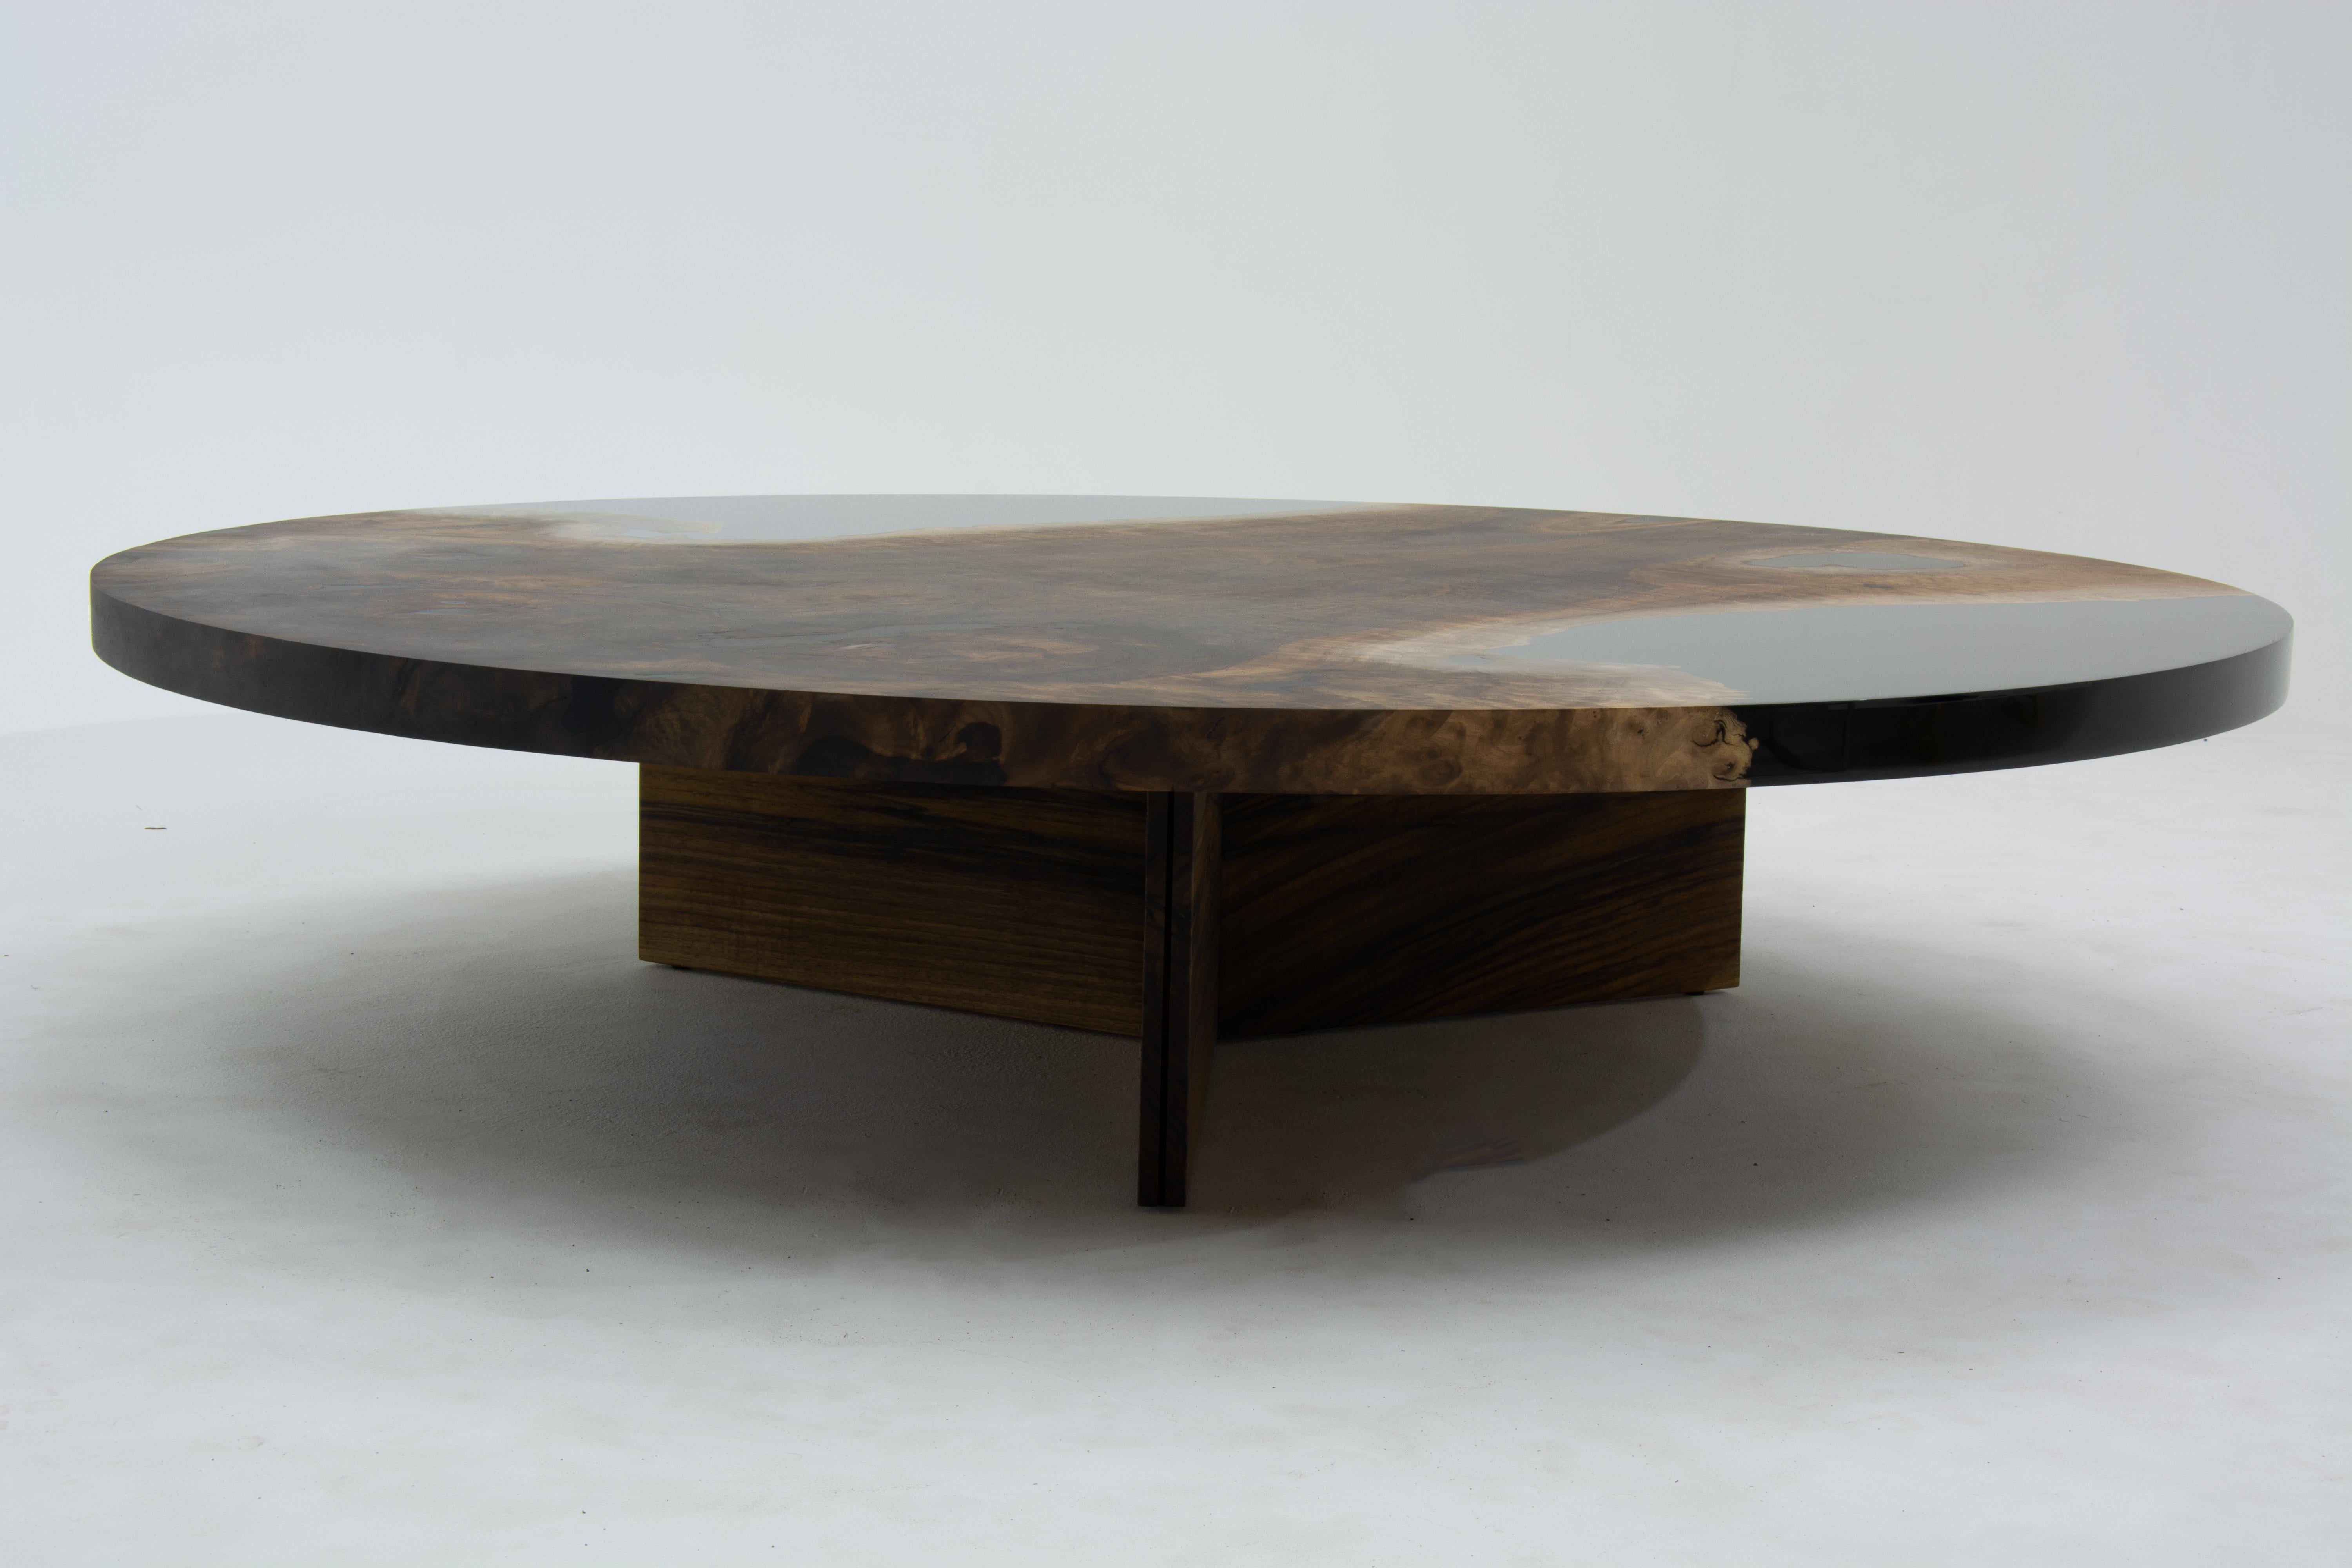 Walnut Custom Clear Epoxy Resin Round Dining Table 

This cofffe table is made of 500 years old walnut wood. The grains and texture of the wood describe what a natural walnut woods looks like.
It can be used as a dining table or as a conference